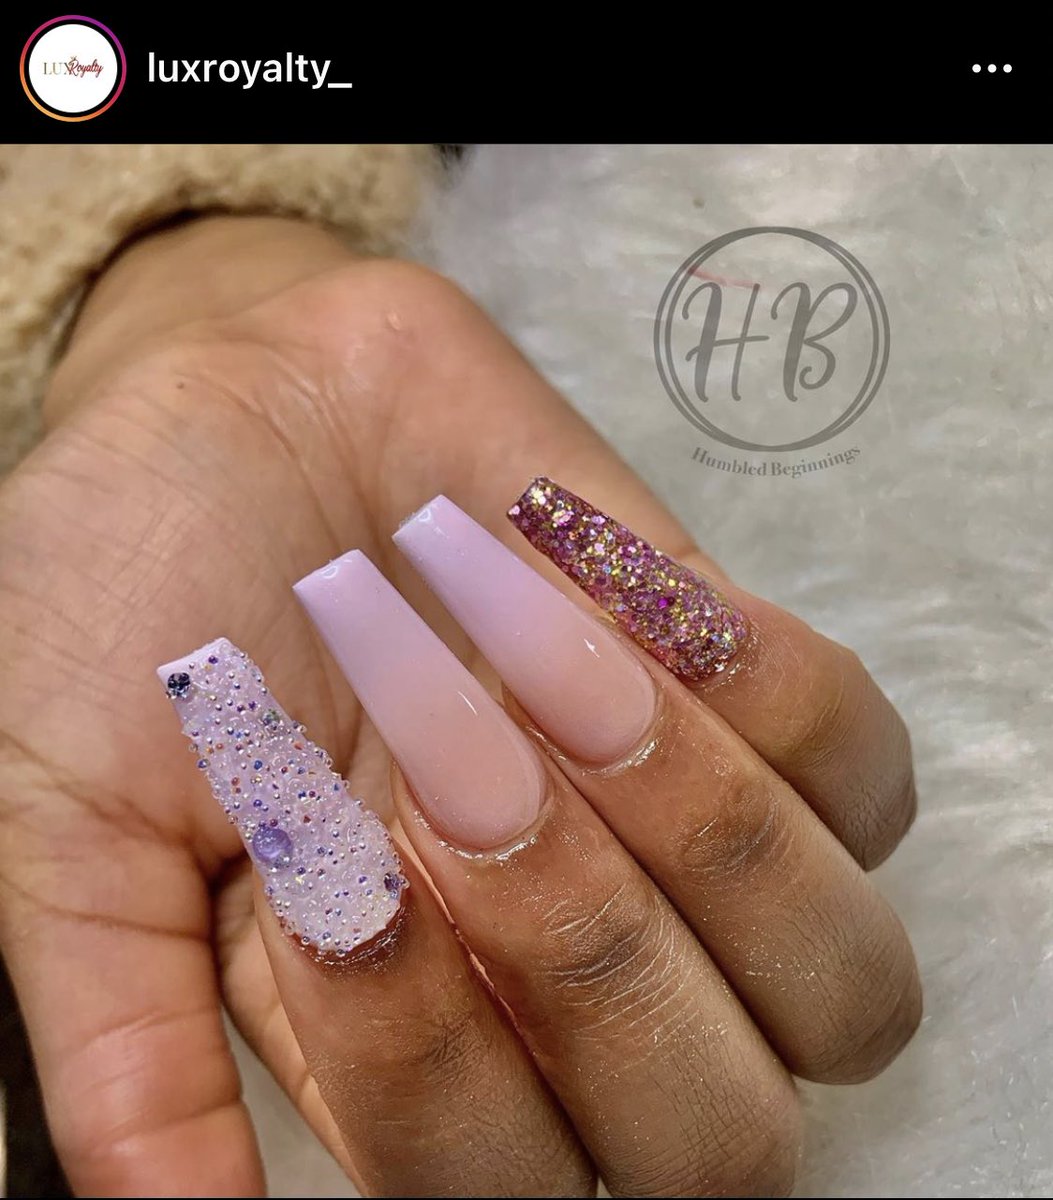  LADIES  I got a friend who can get you RIGHT!! Officially a celeb nail tech, she books quick! Get in now with  @persistentpeace !